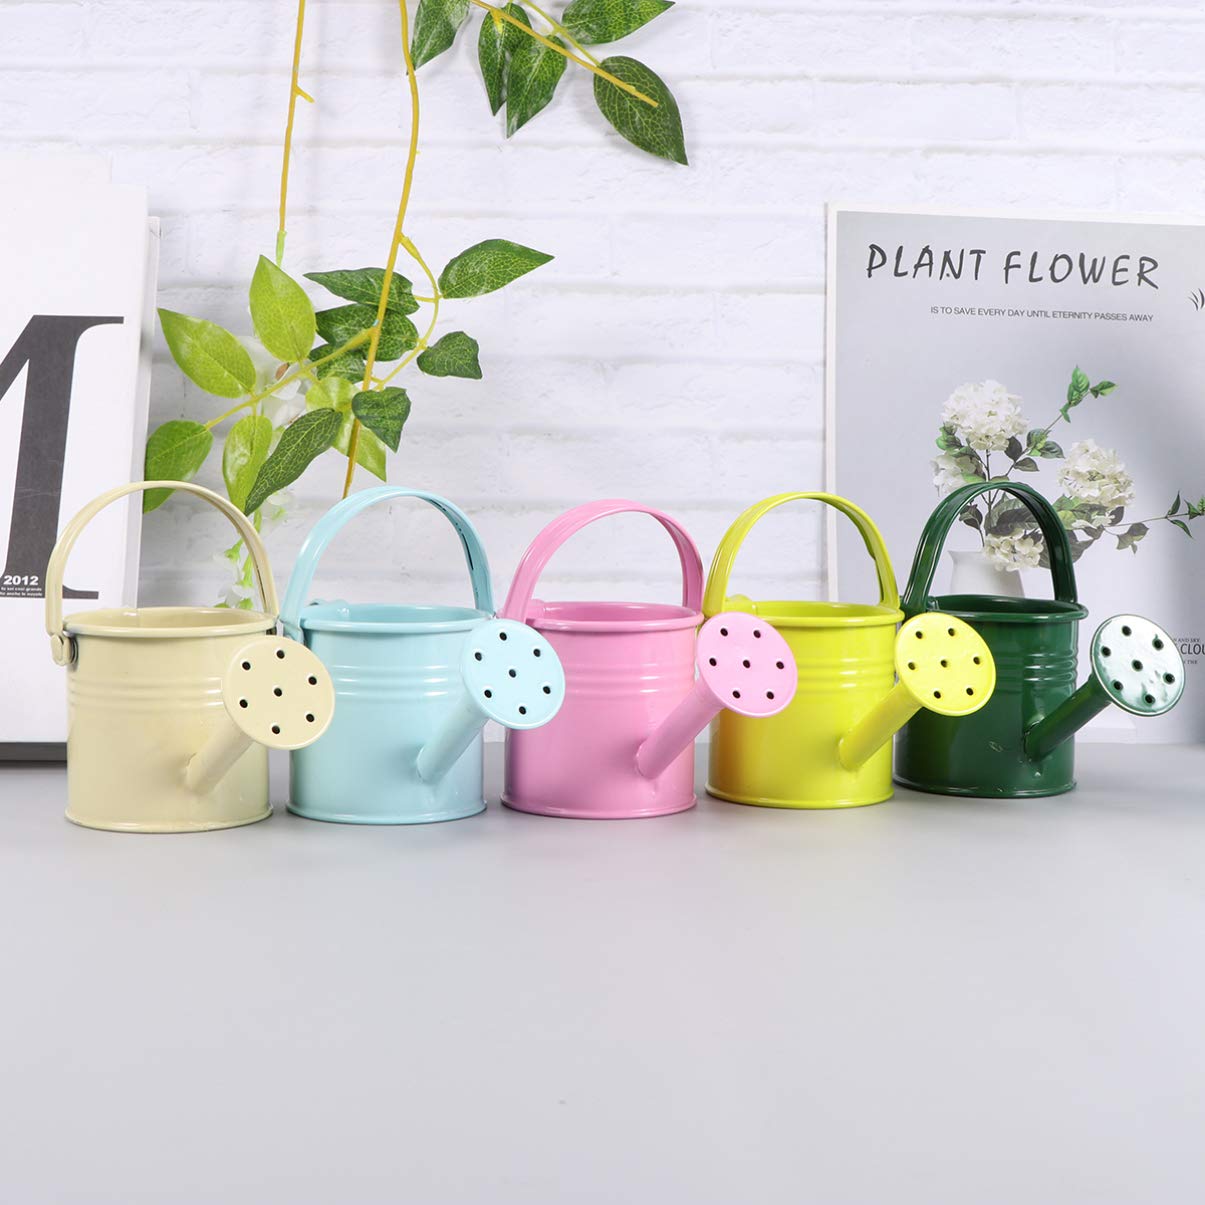 Hemoton Metal Watering Can, 5pcs Simple Kids Watering Can, Children Garden Watering Bucket Iron Watering Tin Can Sprinkling Kettle for Garden Plants Flower 5.9x2.95x2.95 in (Mixed Color)